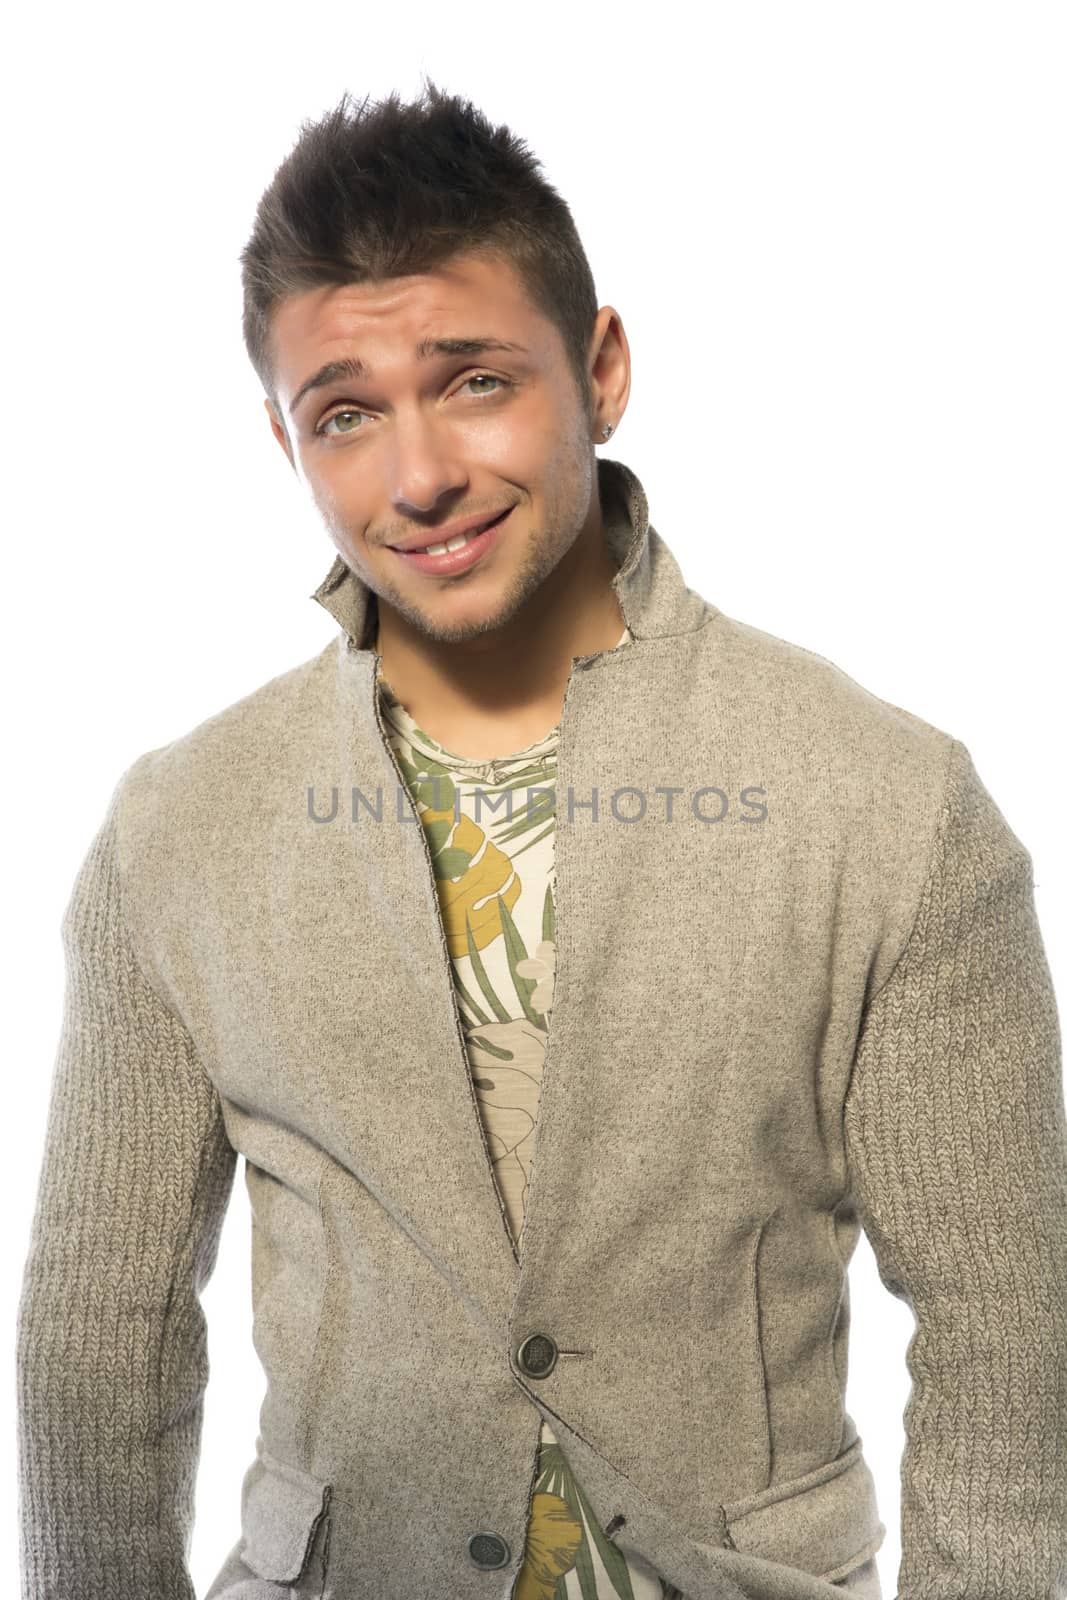 Smiling cool young man with wool sweater on white background looking at camera